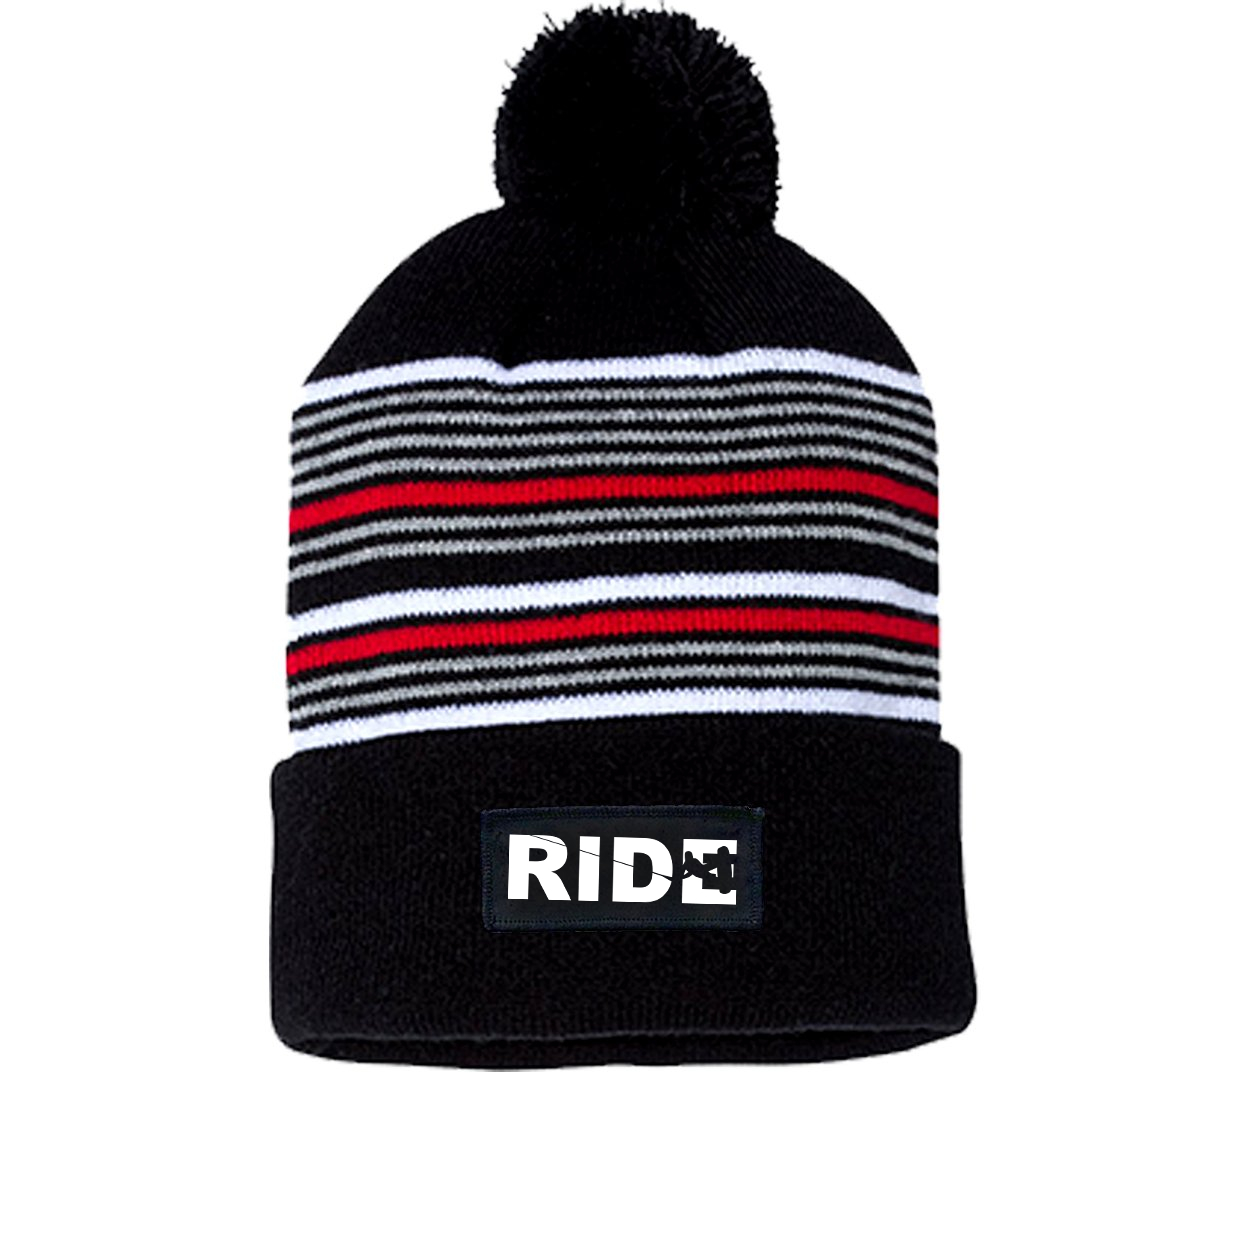 Ride Wakeboard Logo Night Out Woven Patch Roll Up Pom Knit Beanie Black/ White/ Grey/ Red Beanie (White Logo)